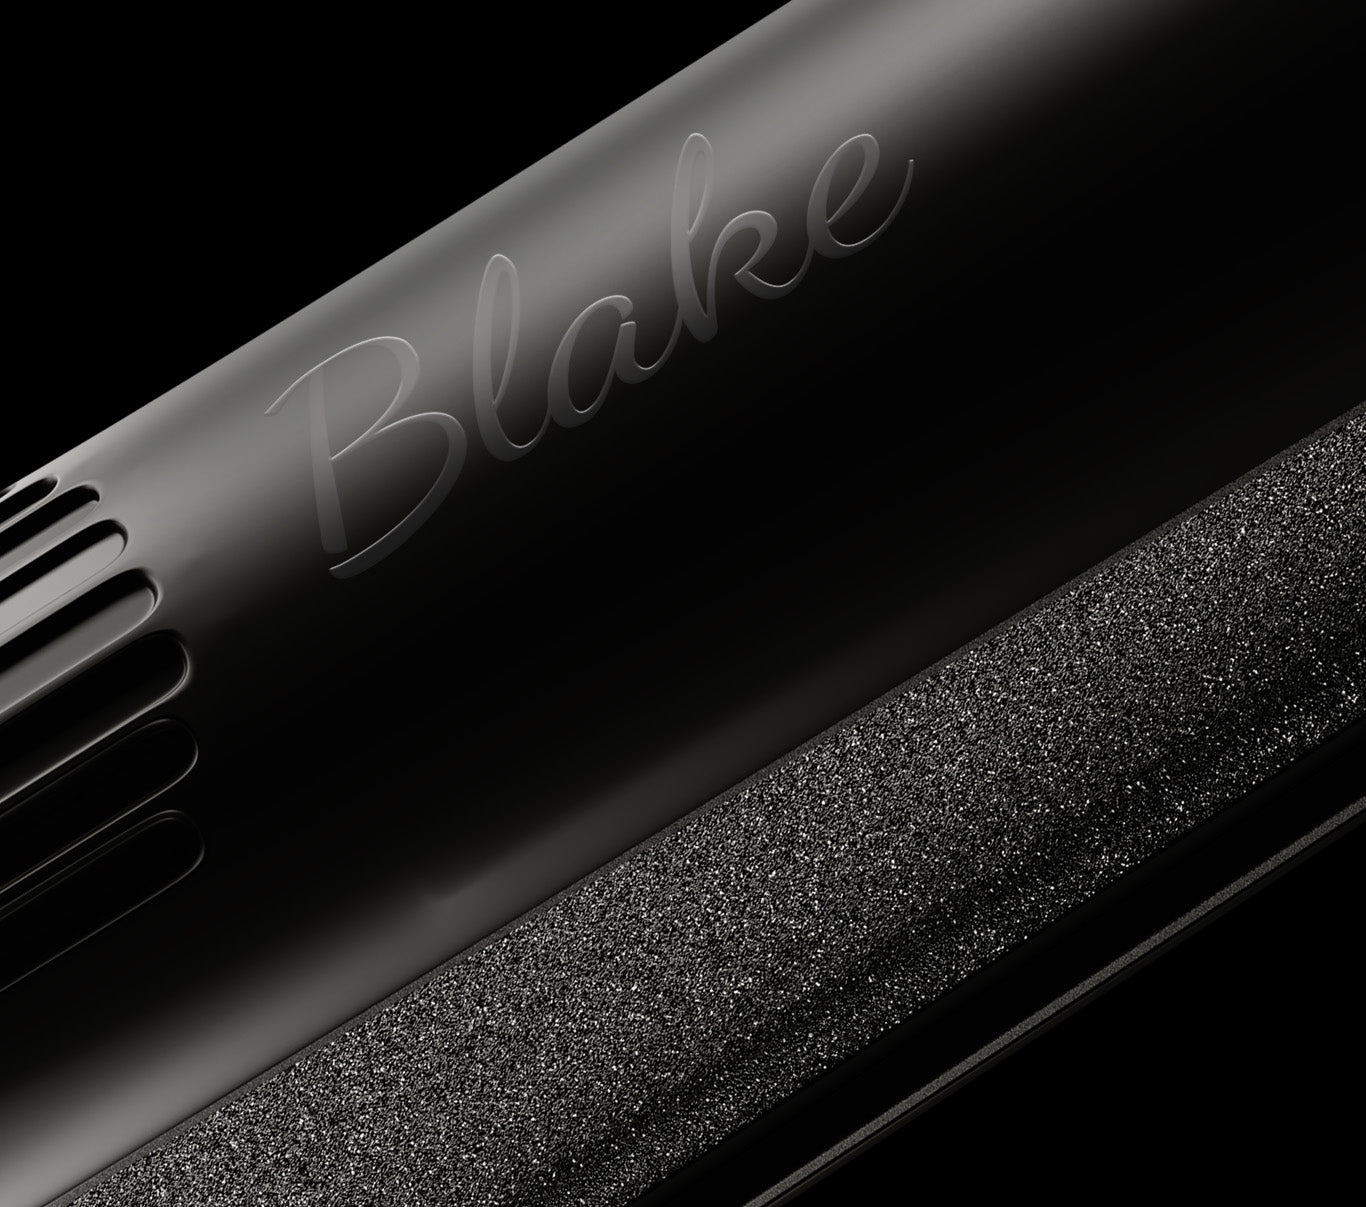 Close-up of CLOUD NINE hair straightener plates with Blake monogrammed.